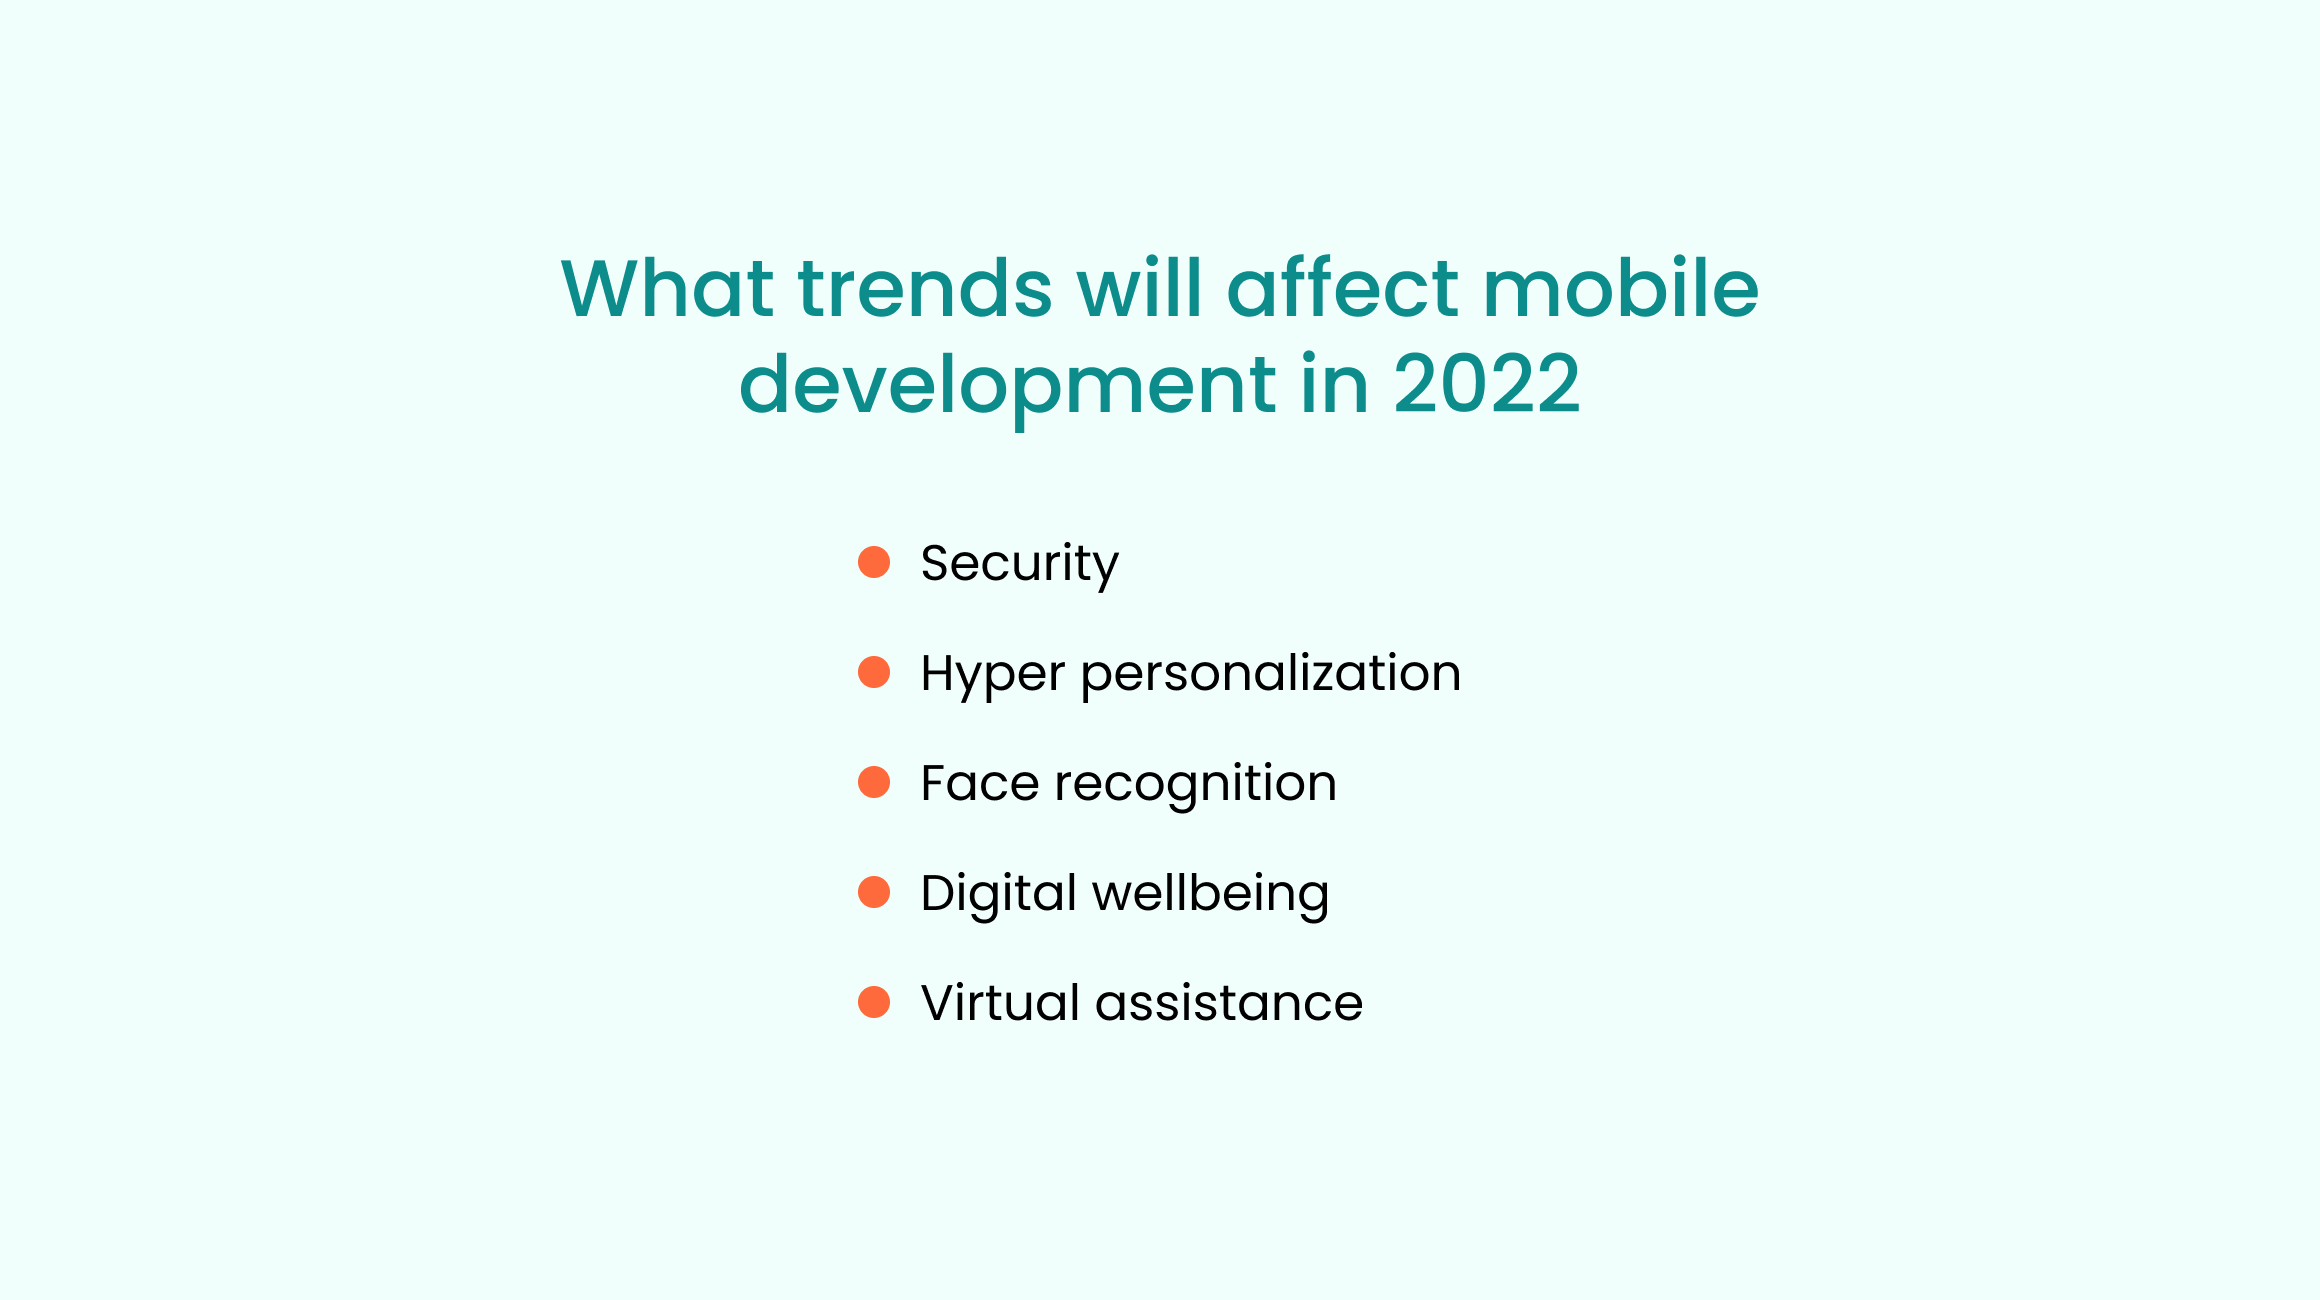 What trends will affect mobile development in 2022